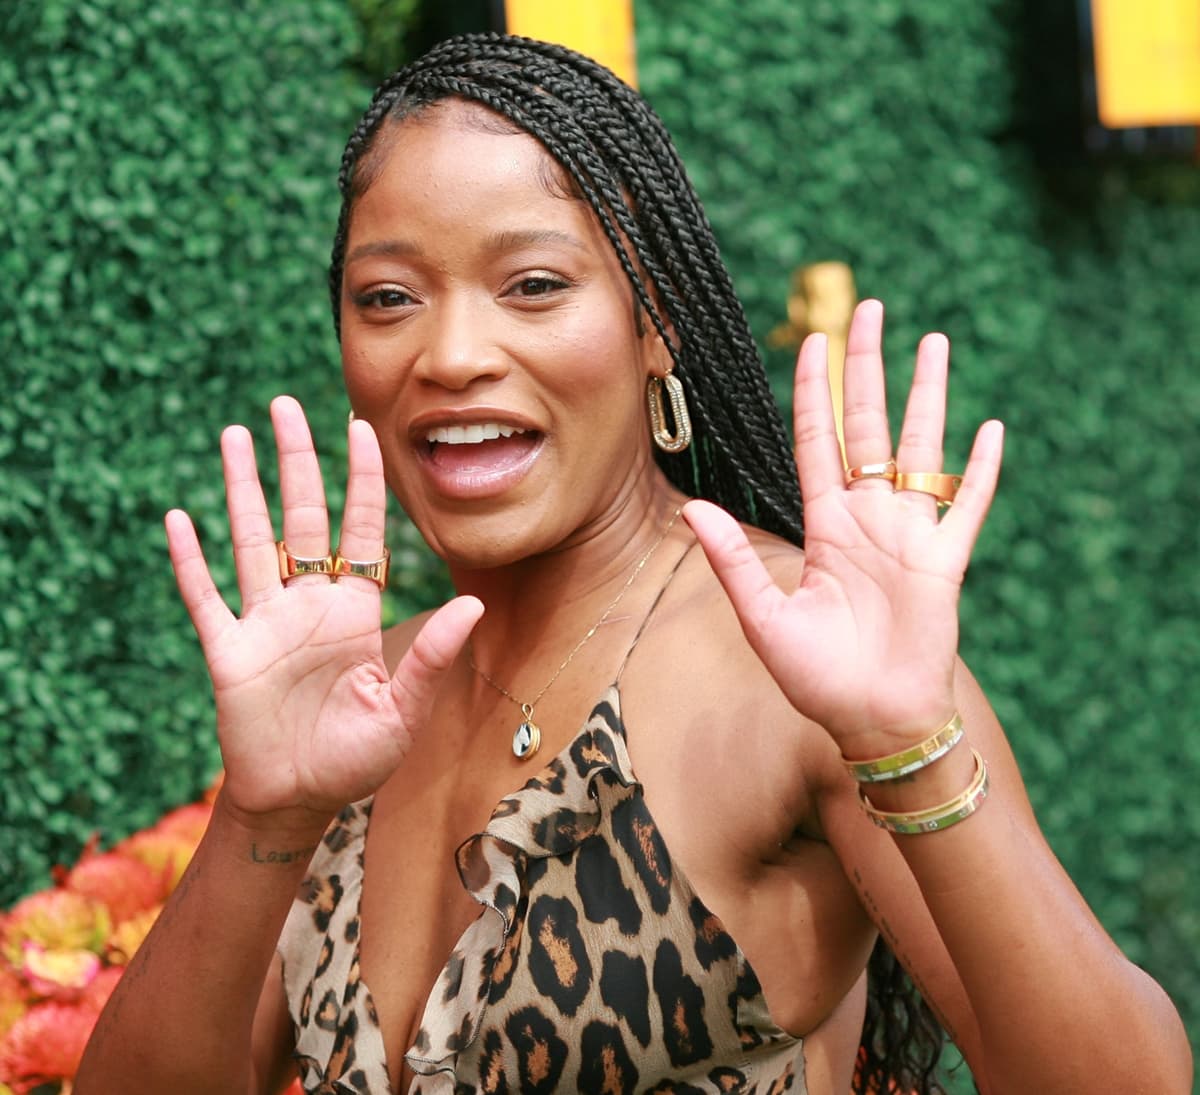 Keke Palmer had her breakthrough playing the title role in the 2006 American drama film Akeelah and the Bee